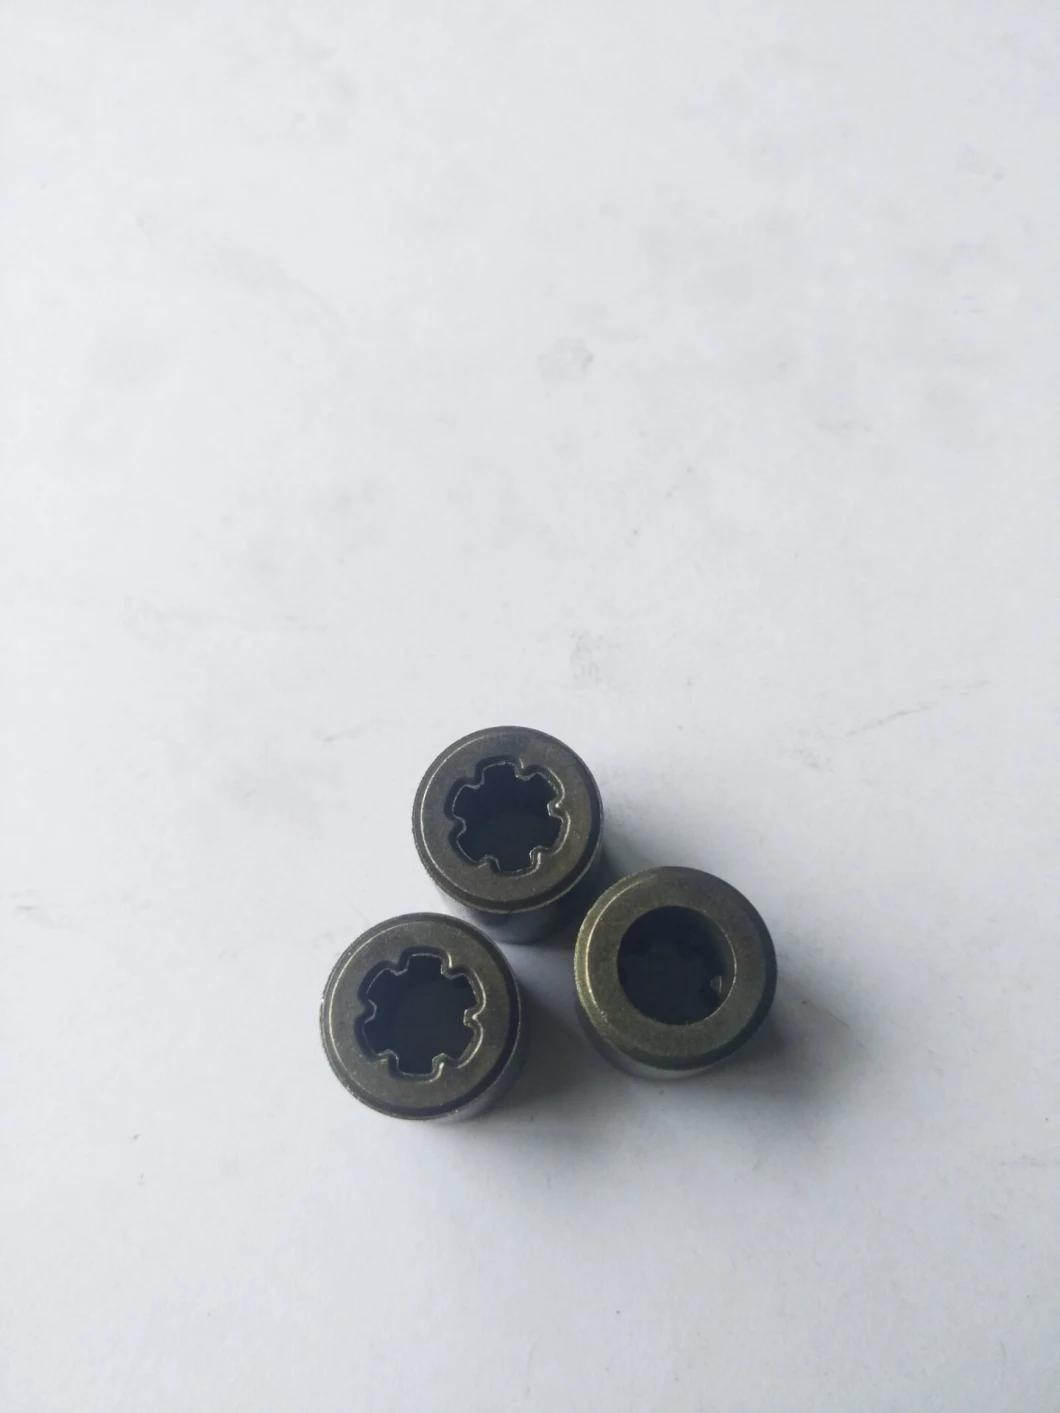 Powder Metallurgy Double Gear for Hand-Operated Electric Drill